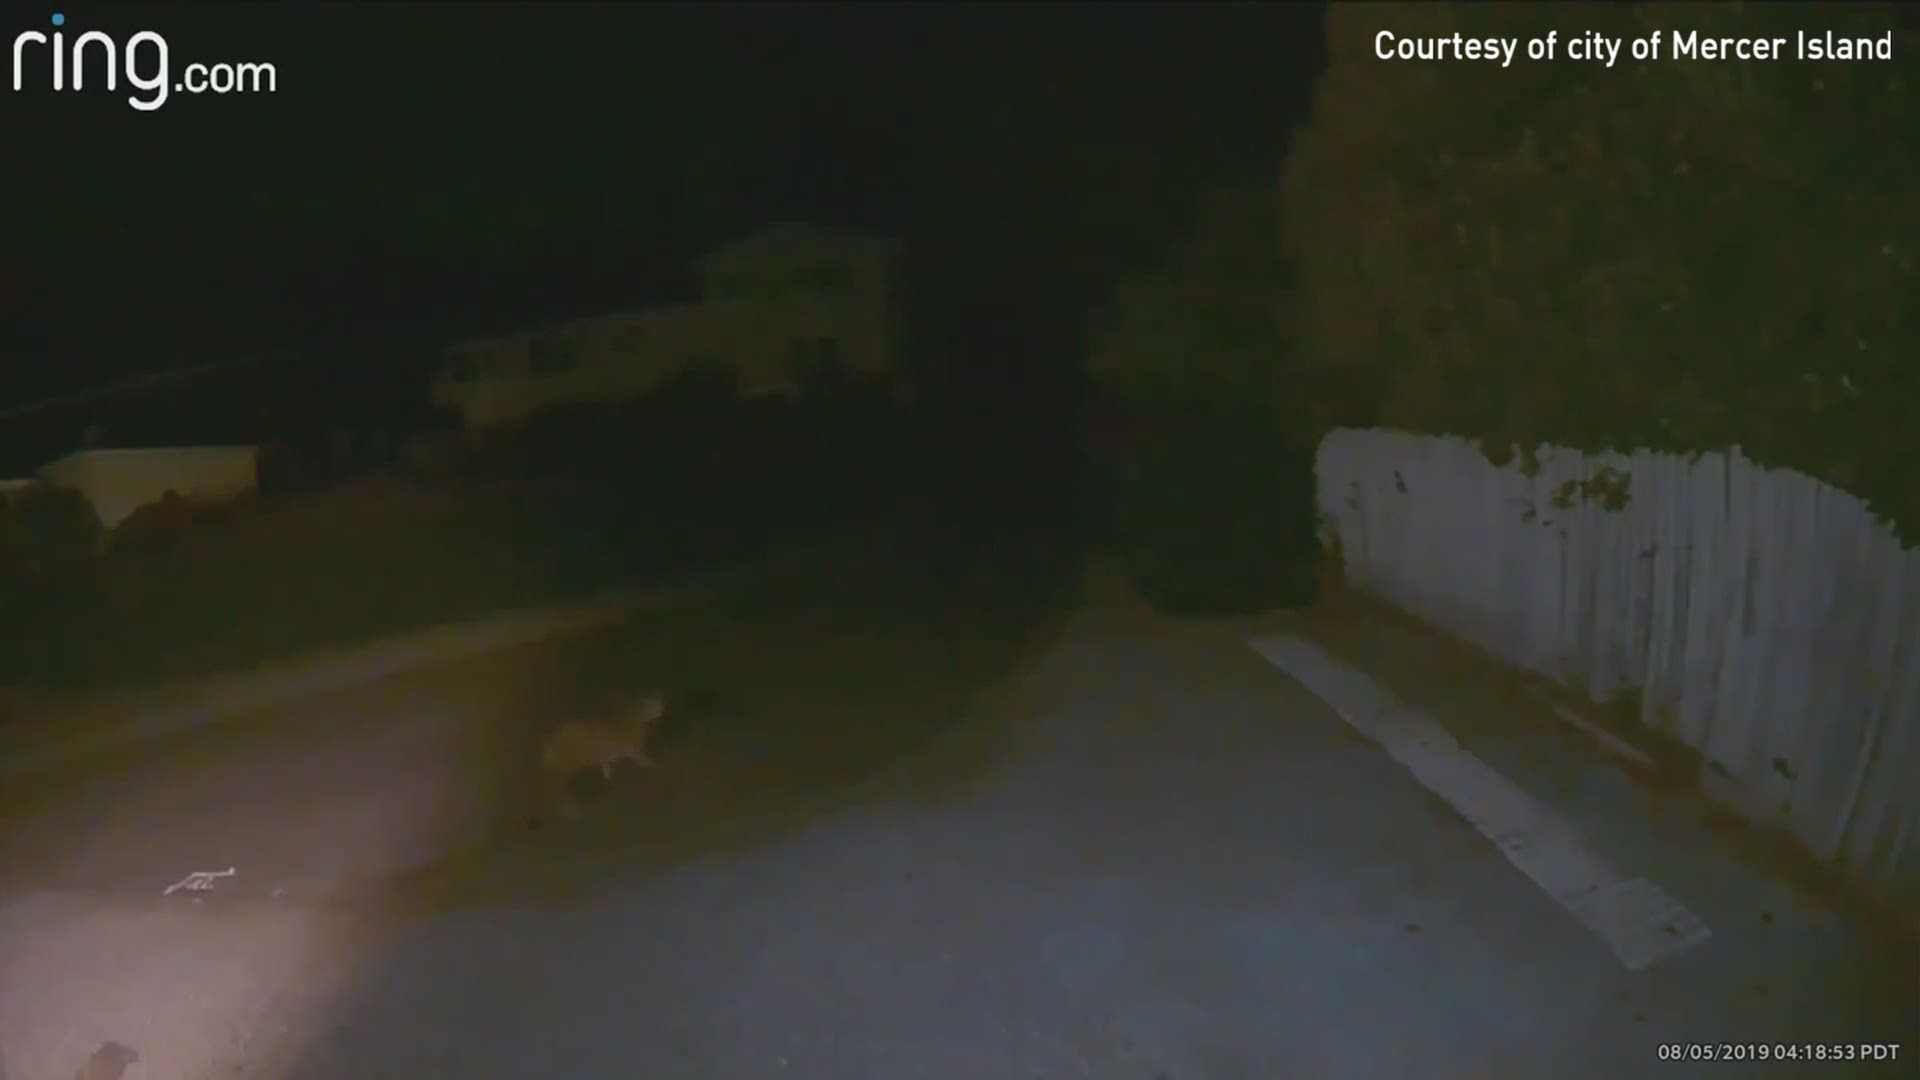 Security camera footage captured a cougar walking near Pioneer Park on Mercer Island early Monday morning.